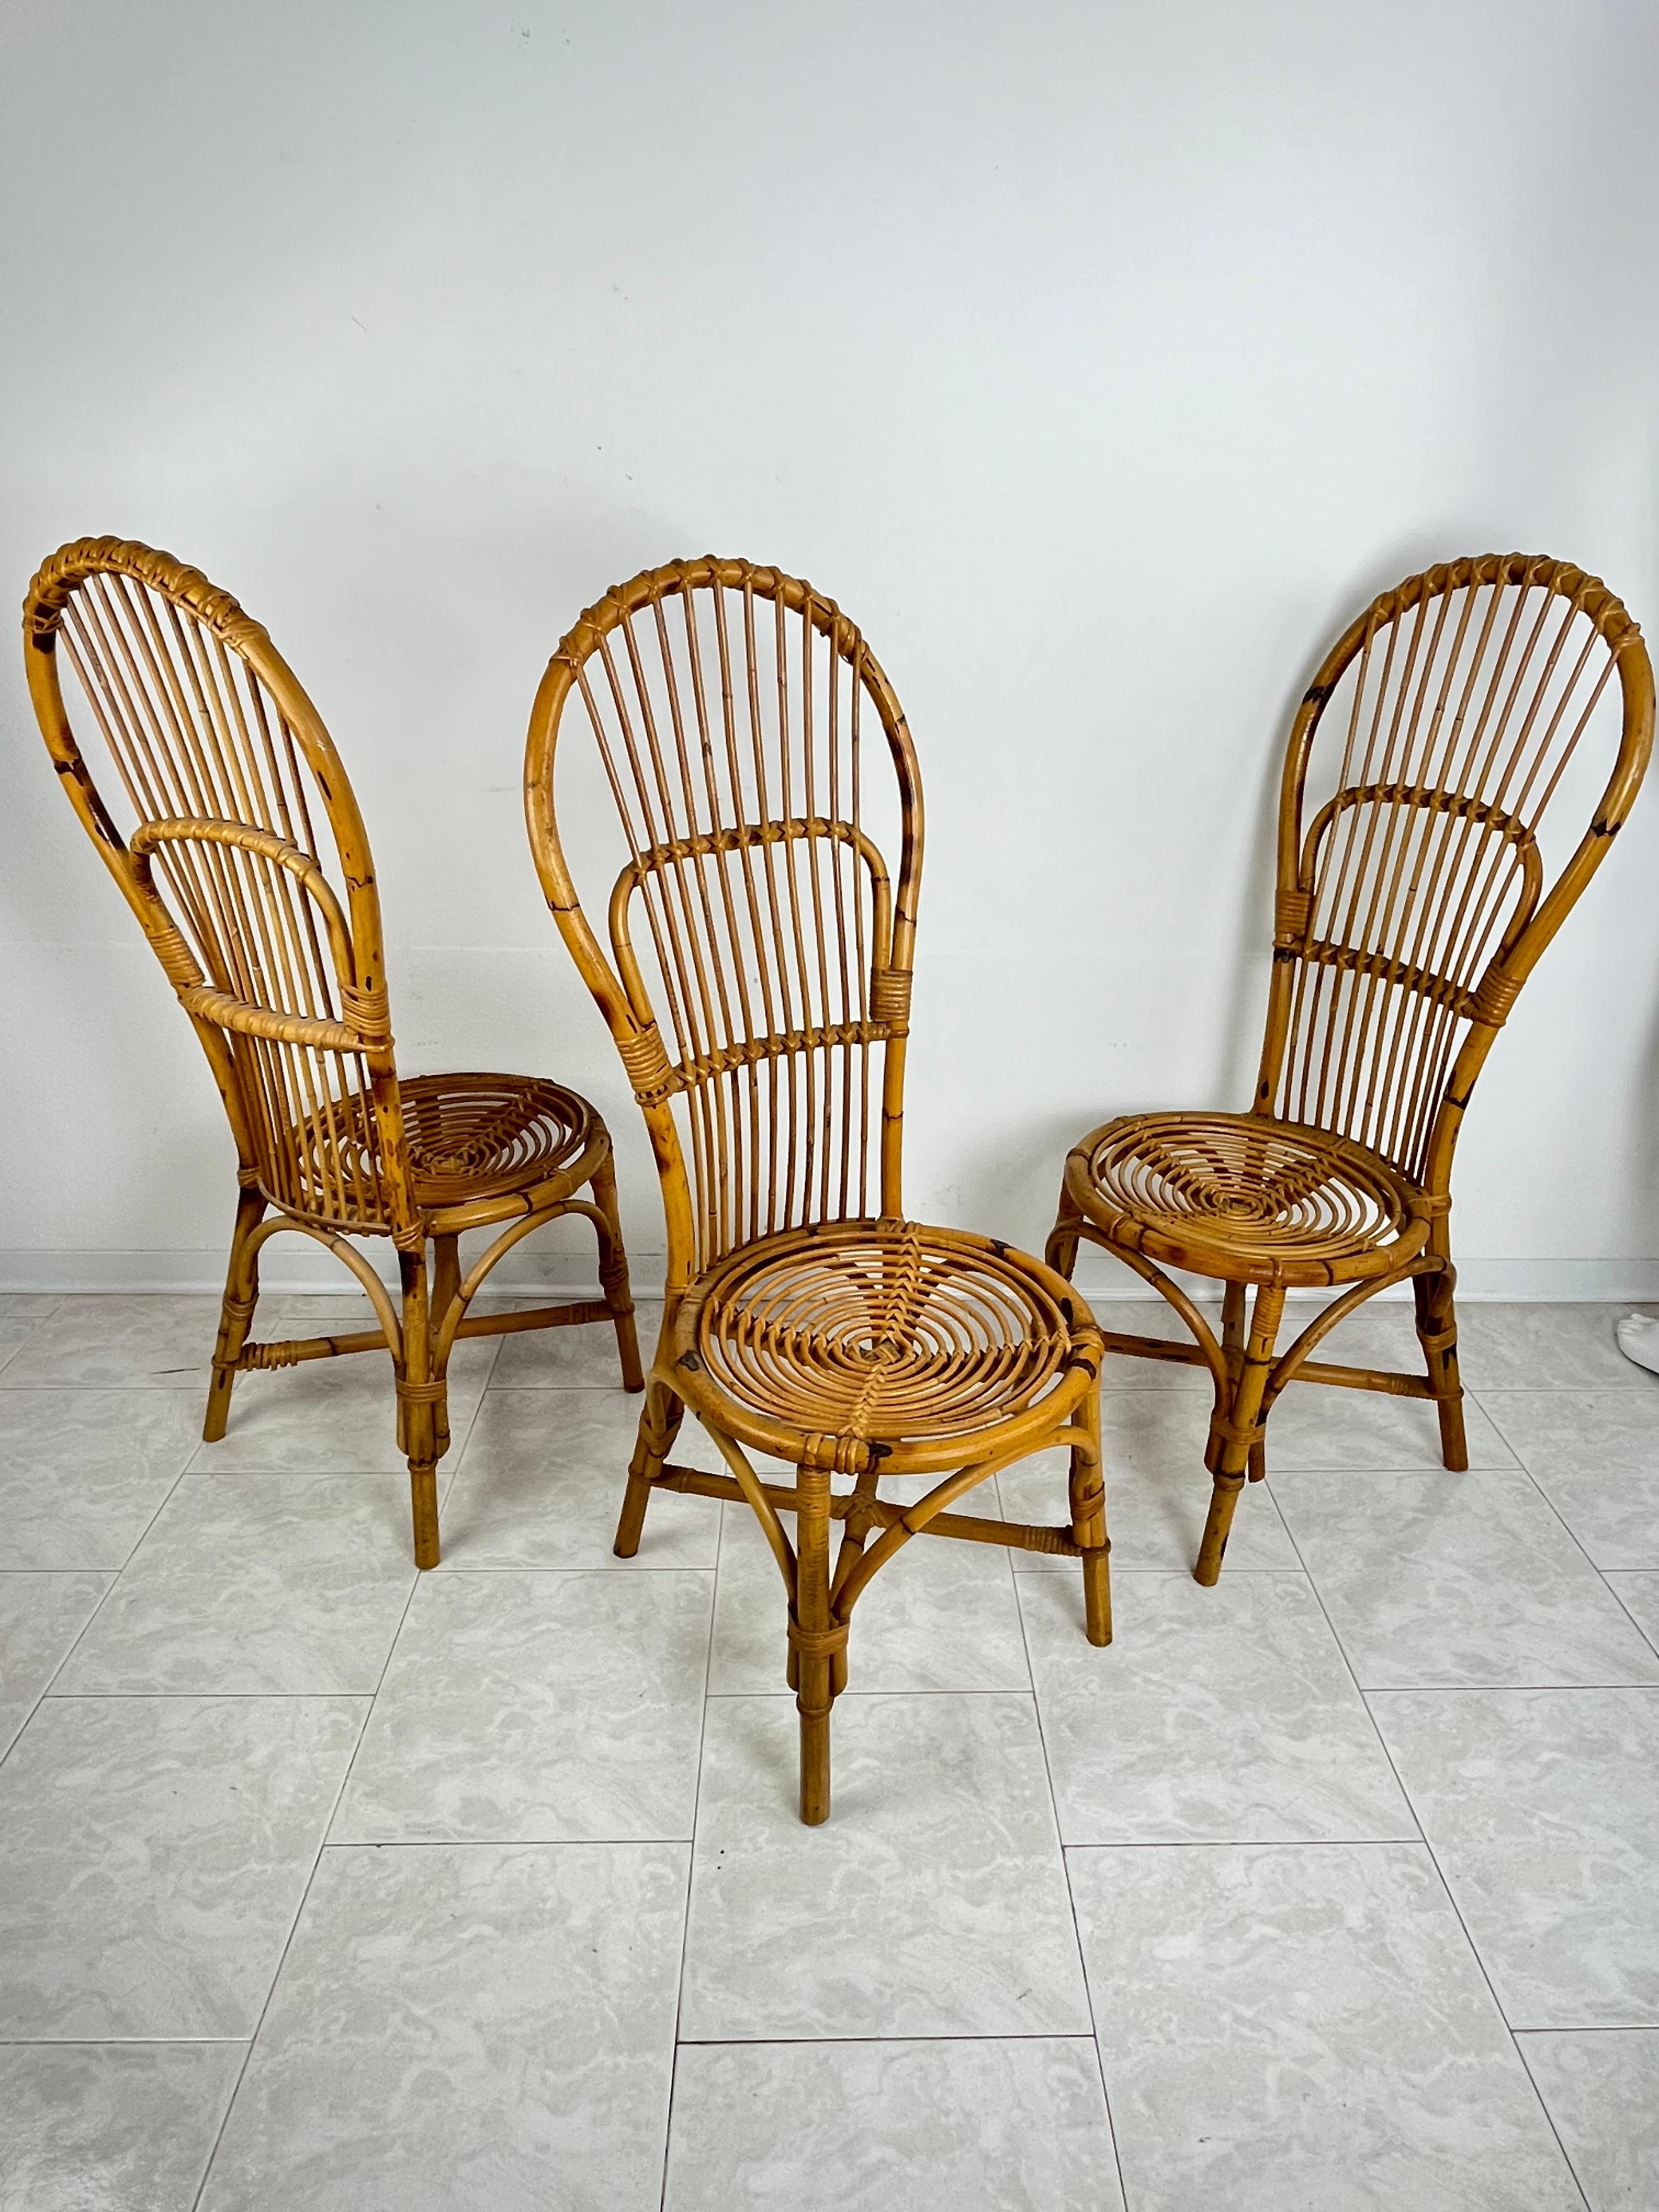 Mid-20th Century Set of 3 Mid-Century Bamboo  Chairs With Fan Backs Italian Design  1950s For Sale